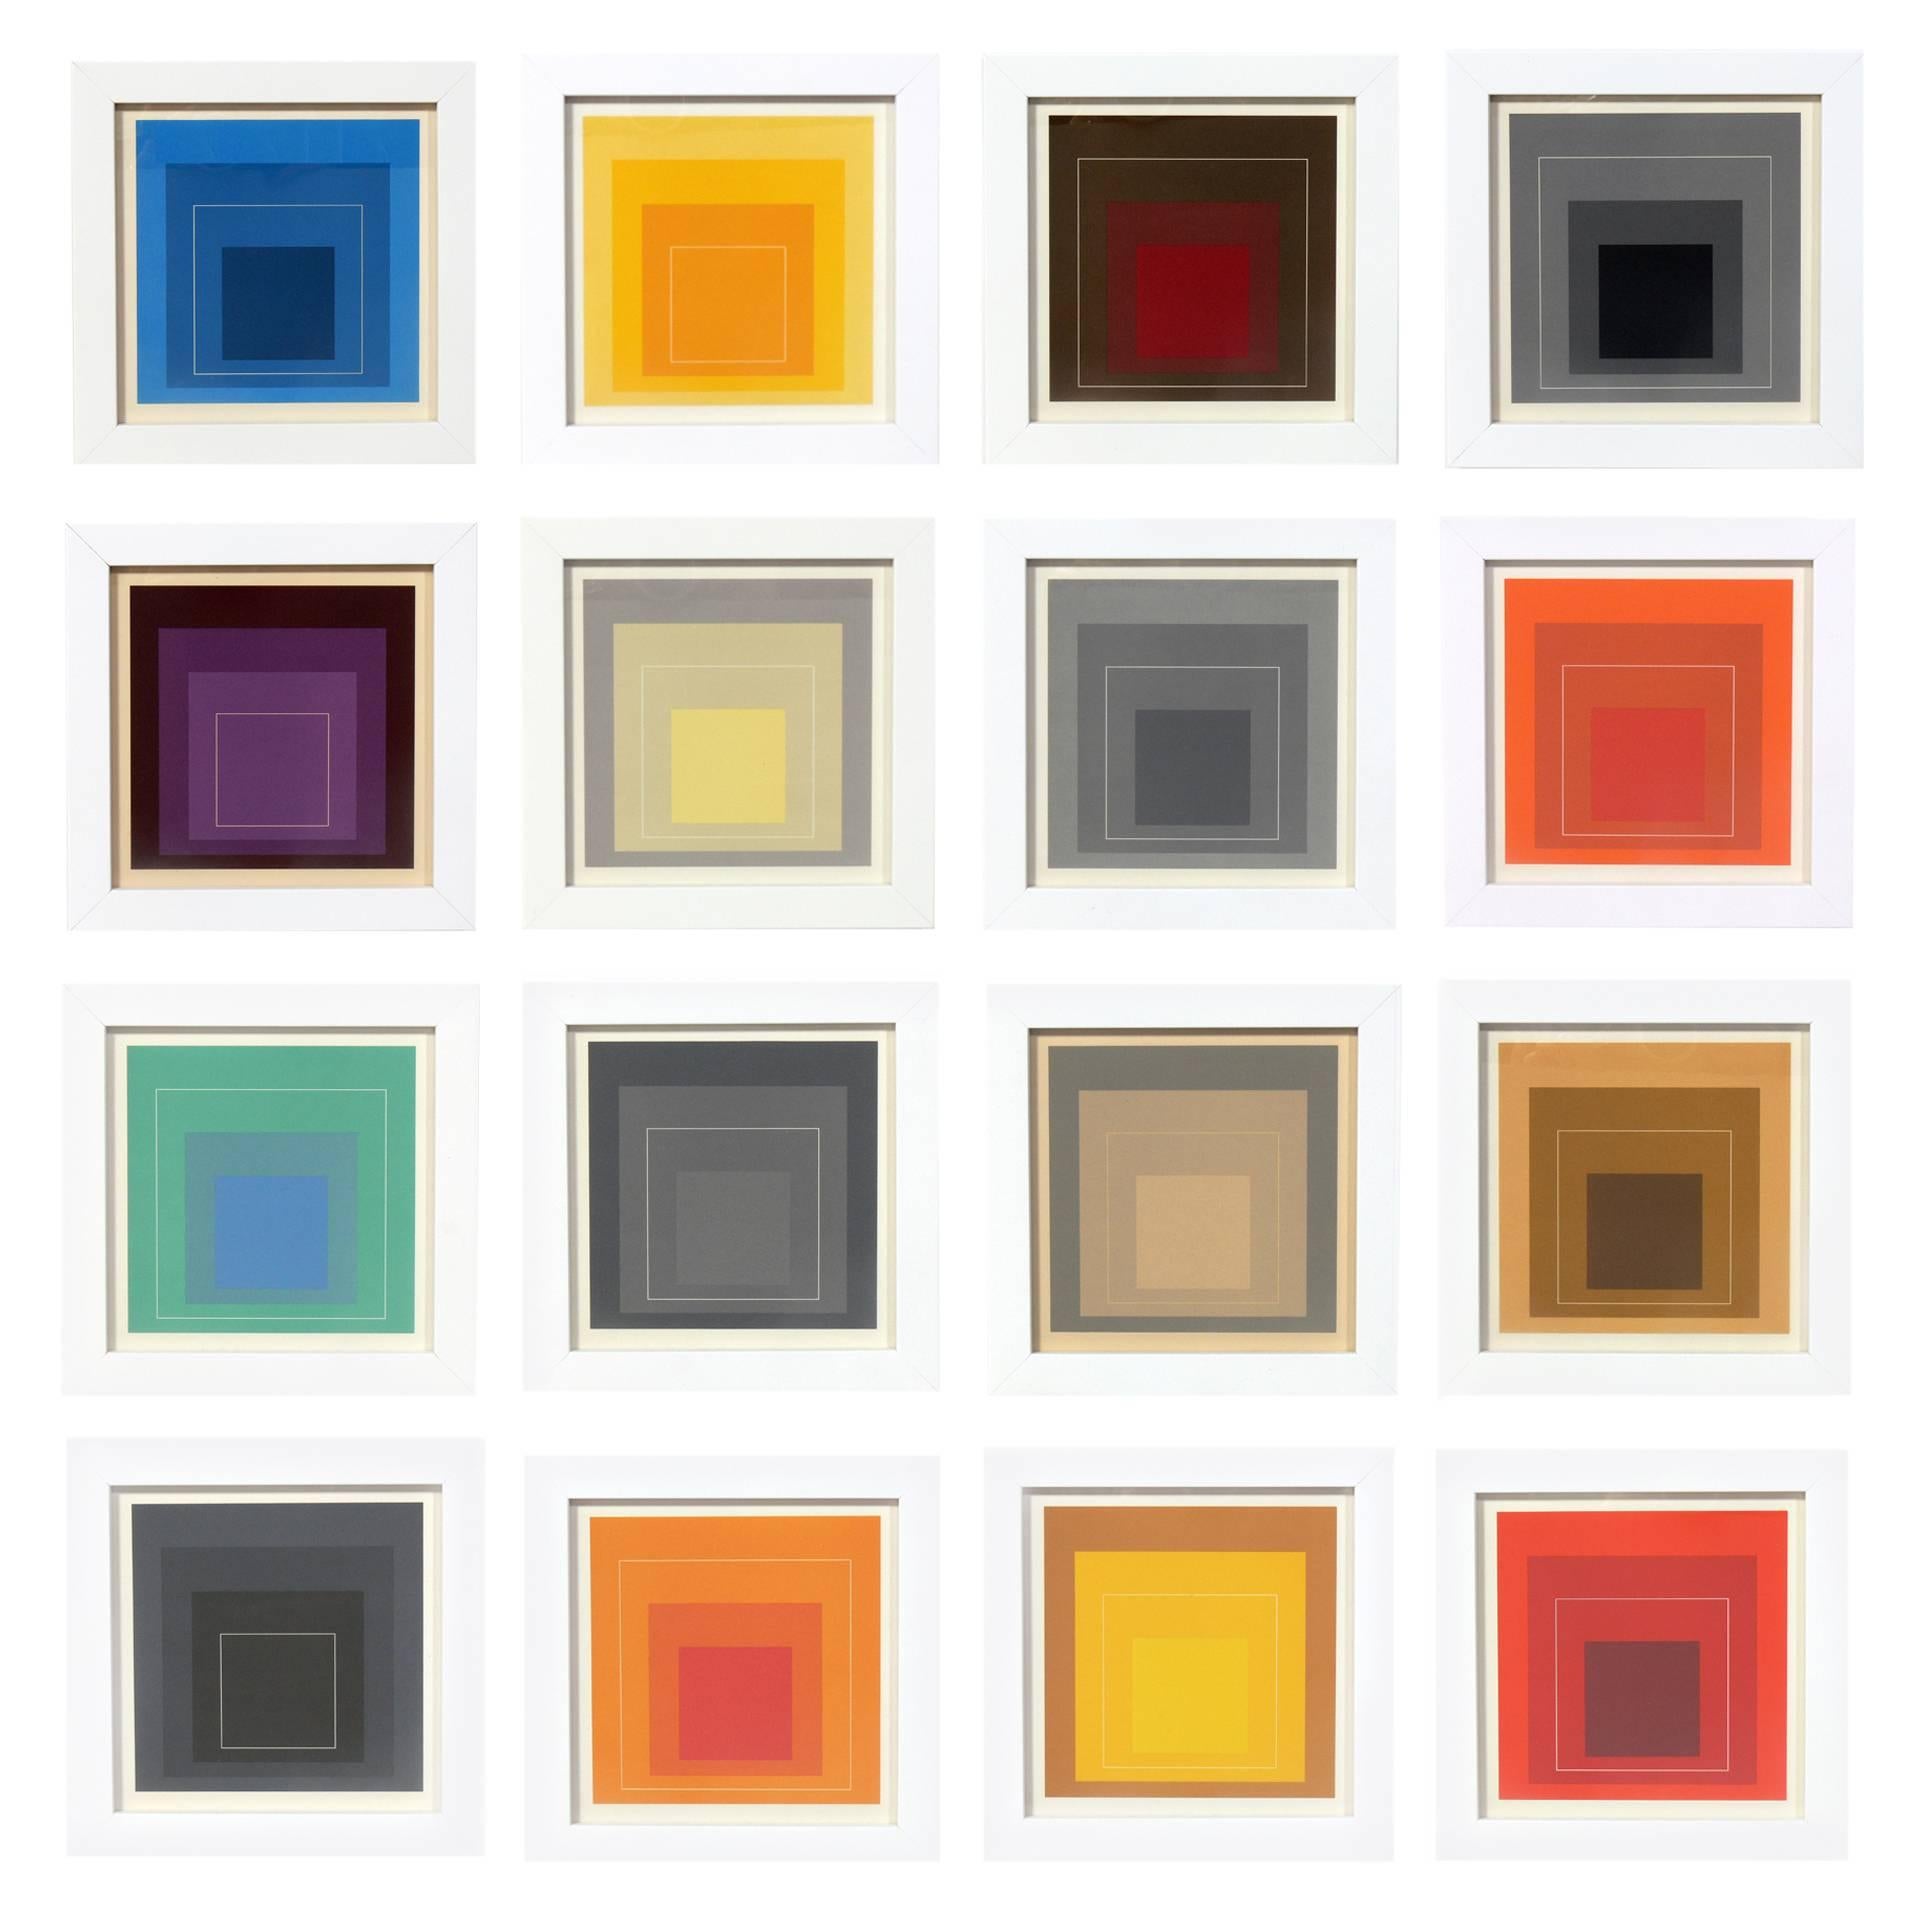 Josef Albers "Homage to the Square" Complete Suite of 16